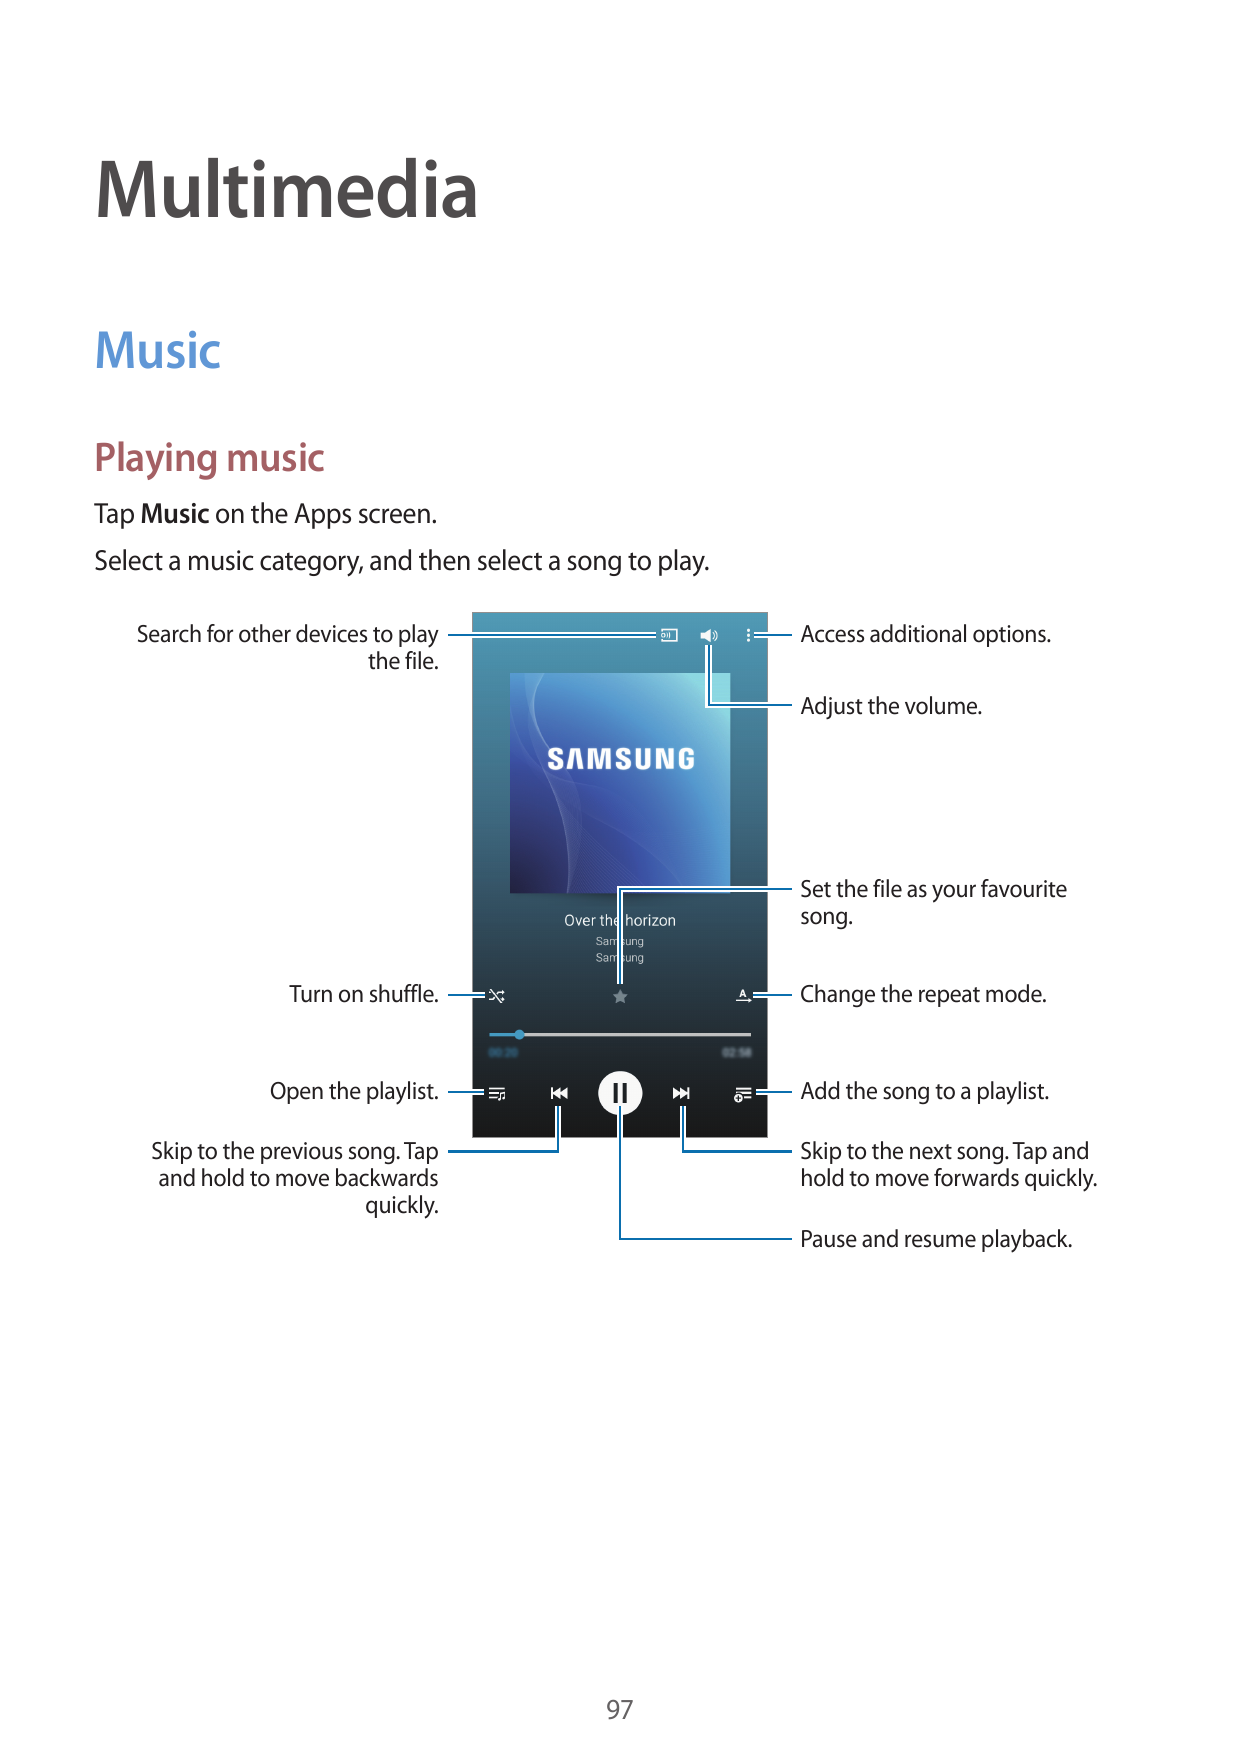 MultimediaMusicPlaying musicTap Music on the Apps screen.Select a music category, and then select a song to play.Search for othe